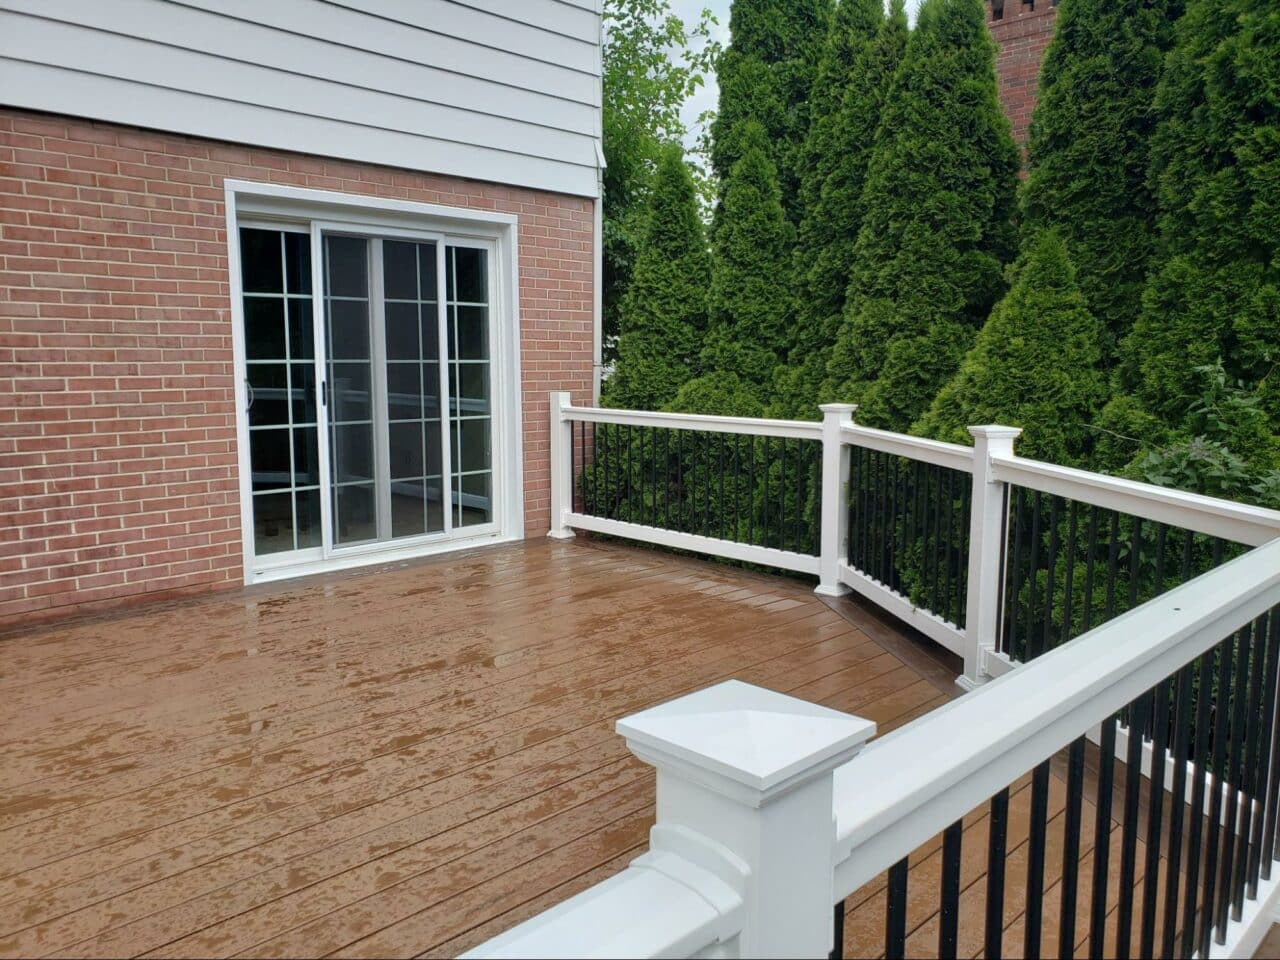 Photo of a custom deck with black and white deck railing.